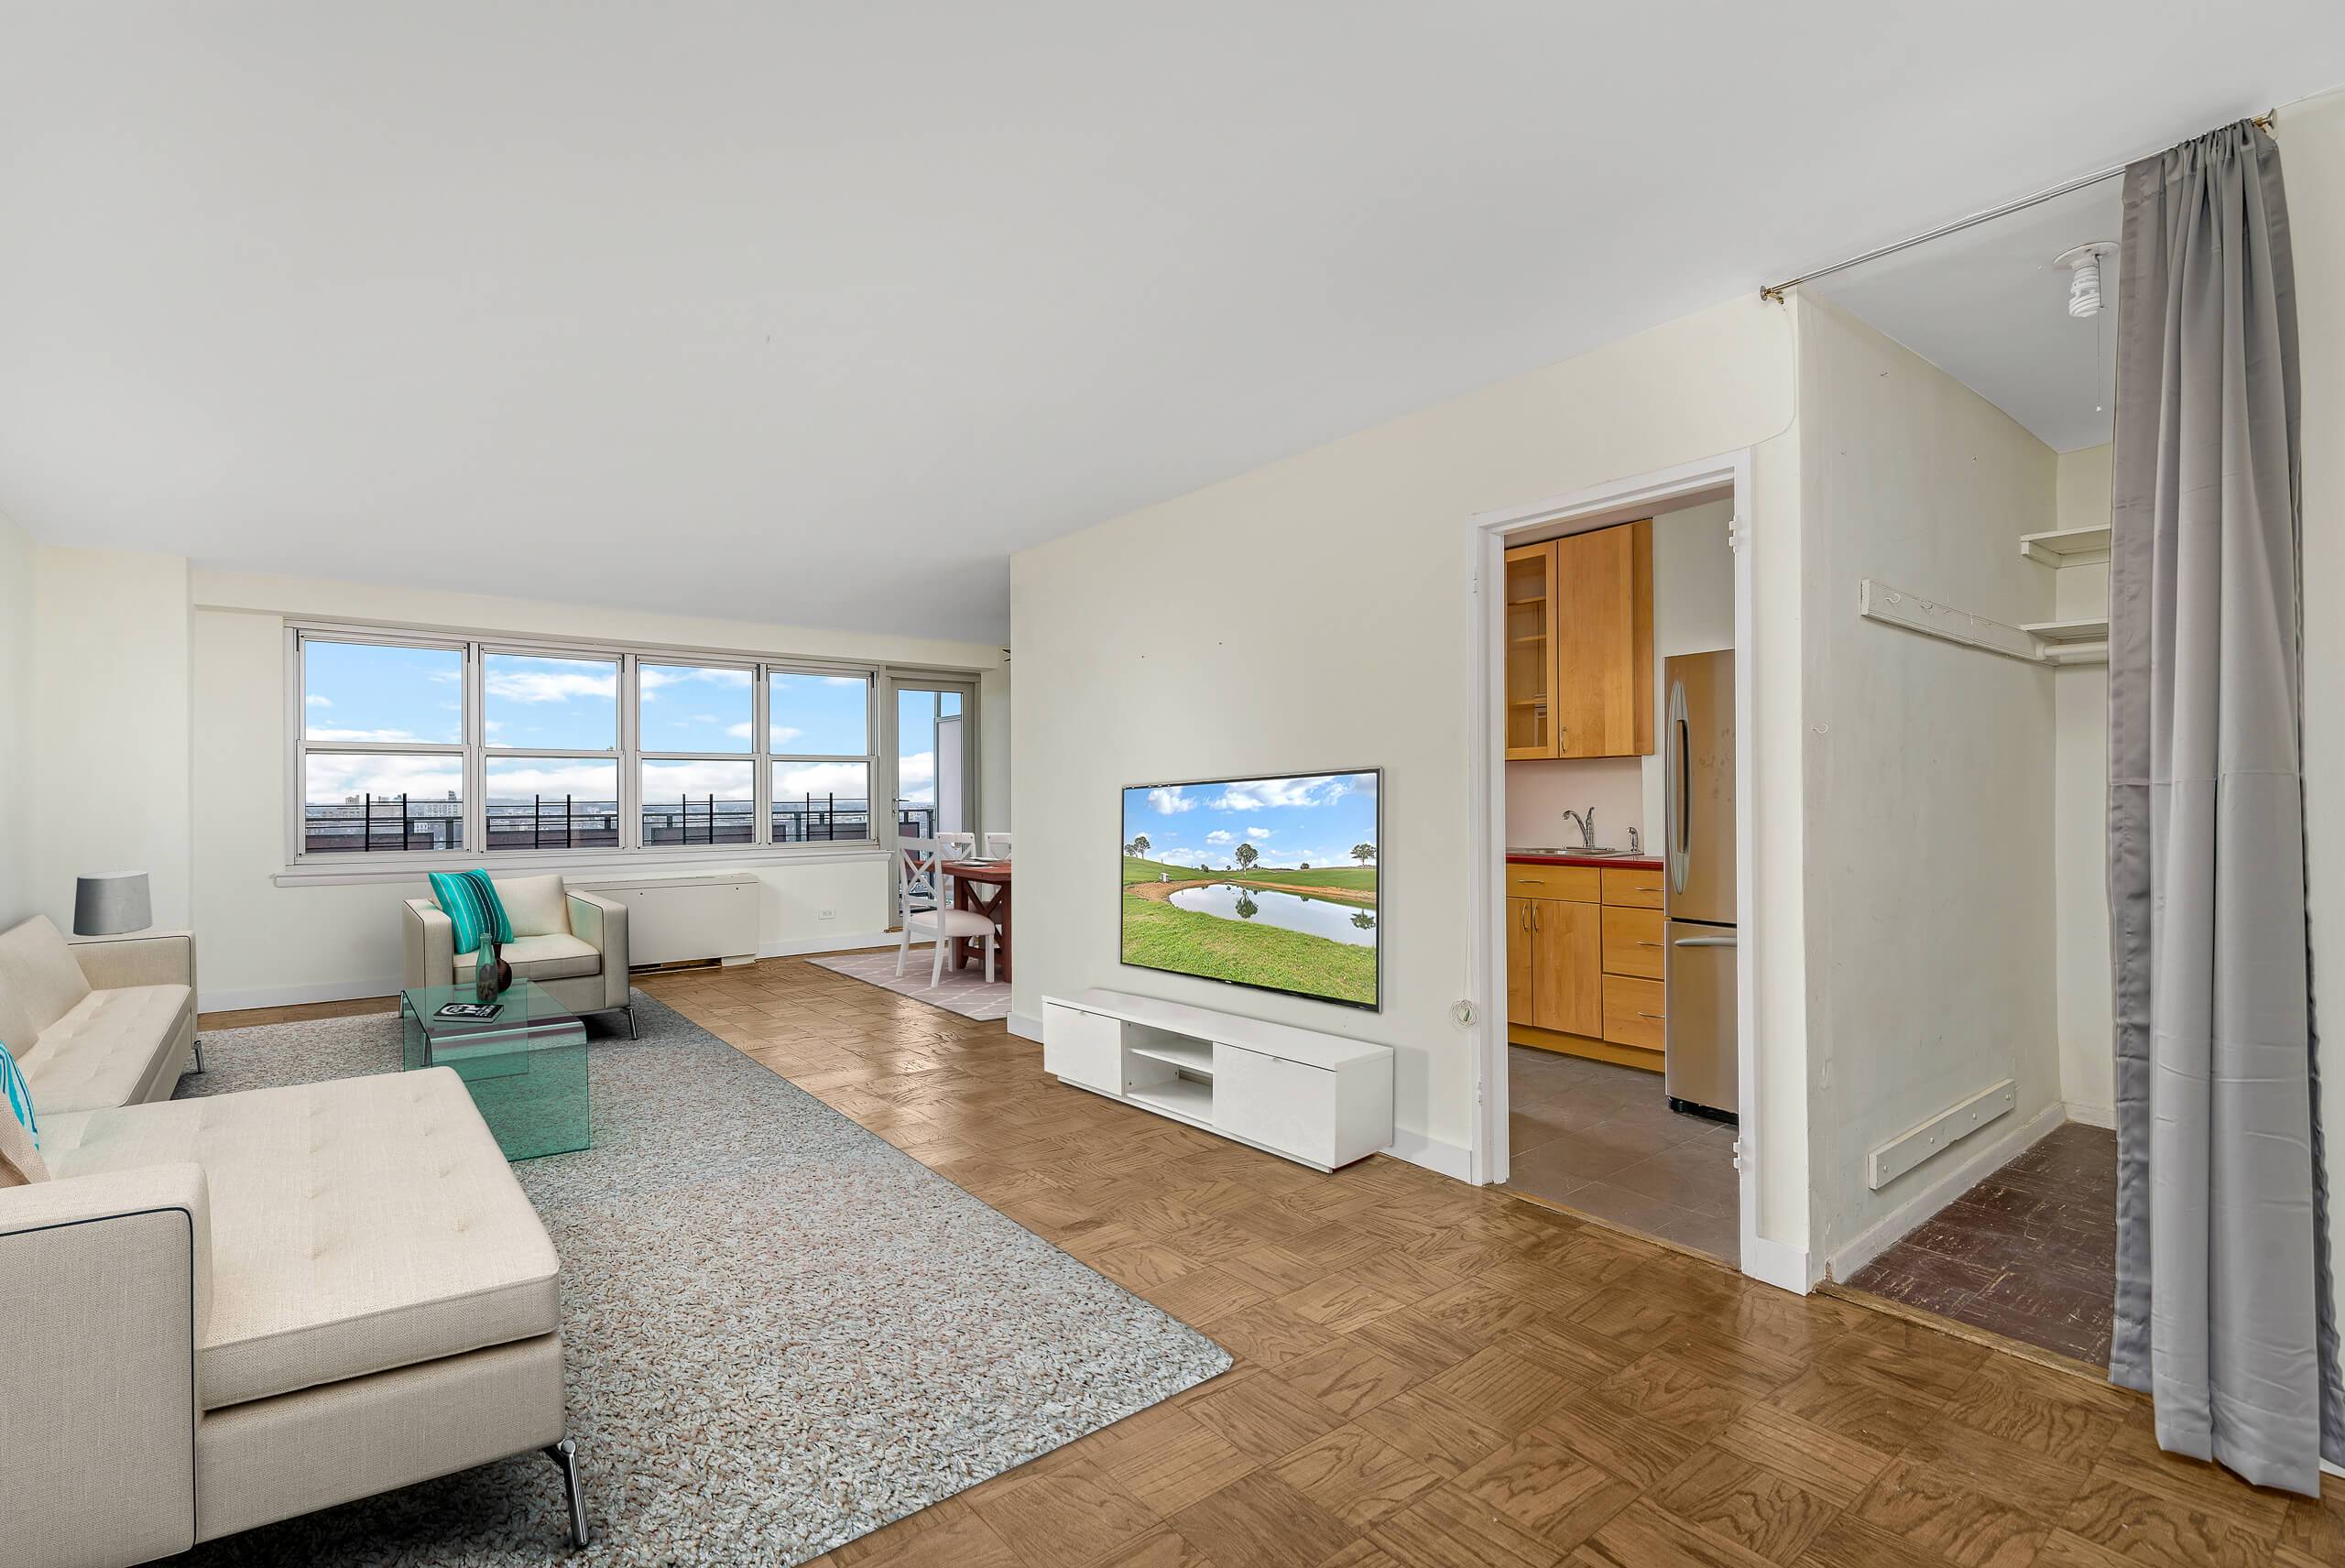 High Floor, the Most incredible panoramic views of all Brooklyn from the Rockaways to the City.